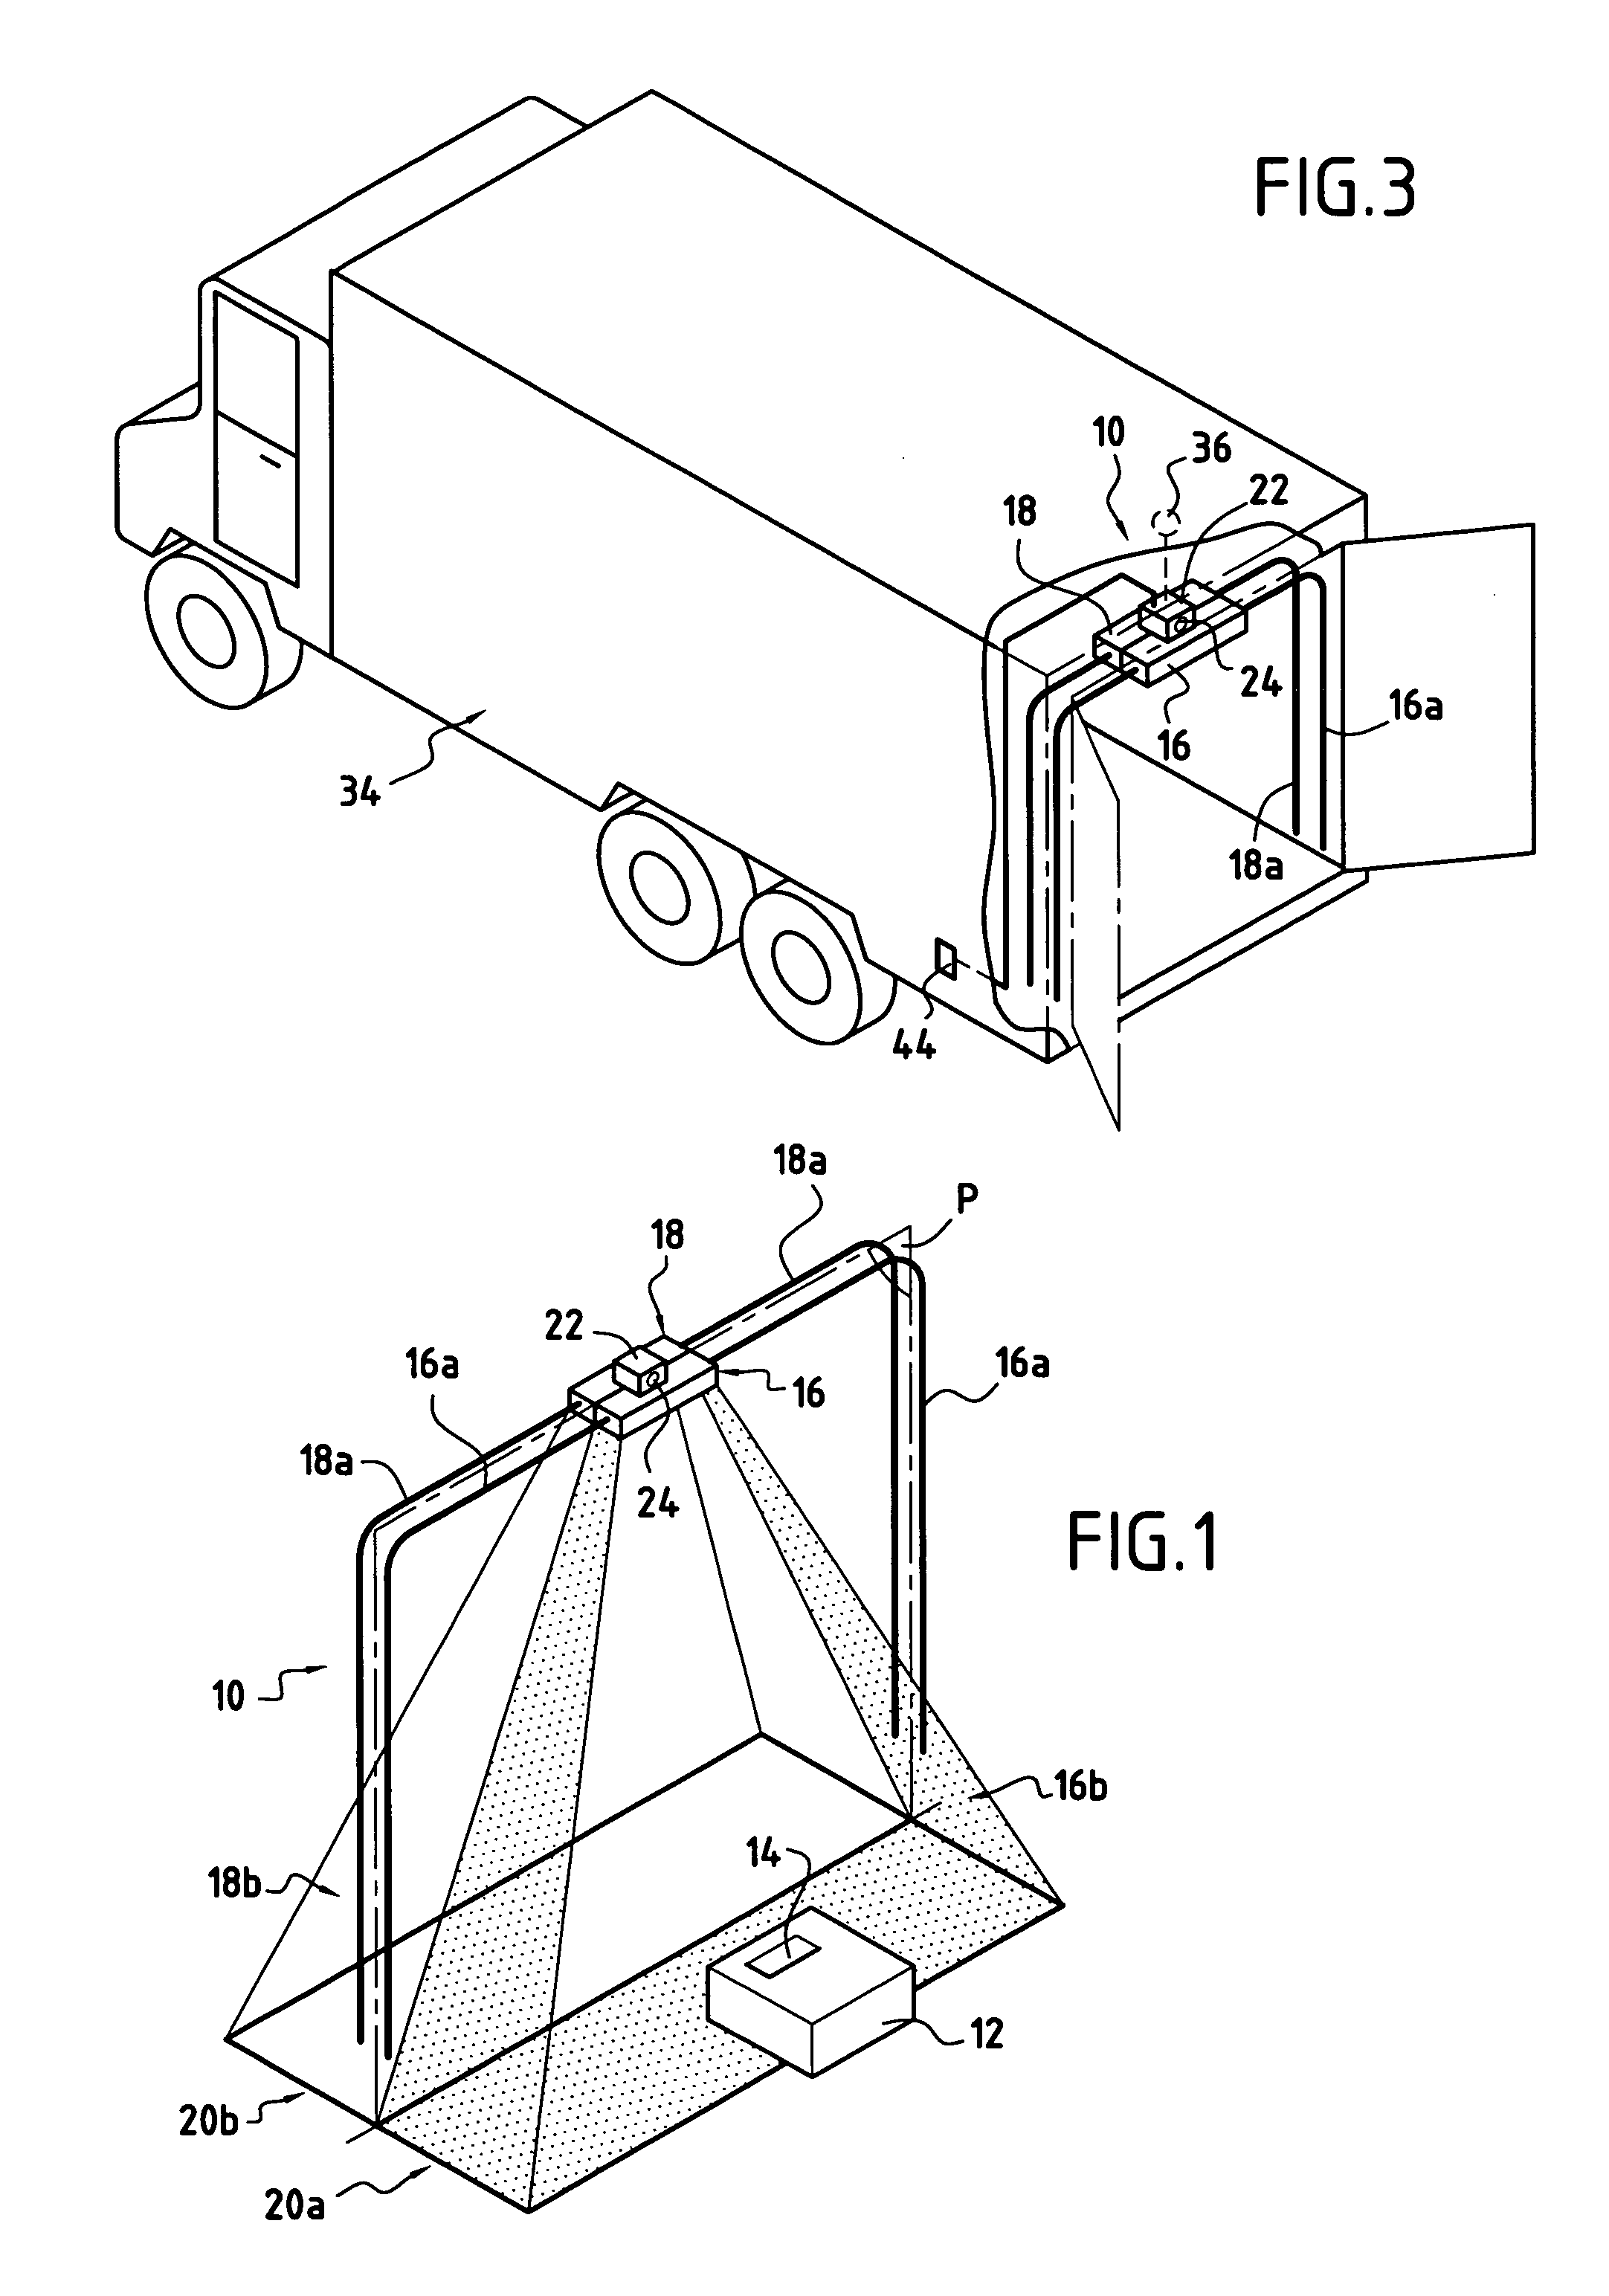 Detector system for detecting the direction in which an item passes through a determined boundary zone